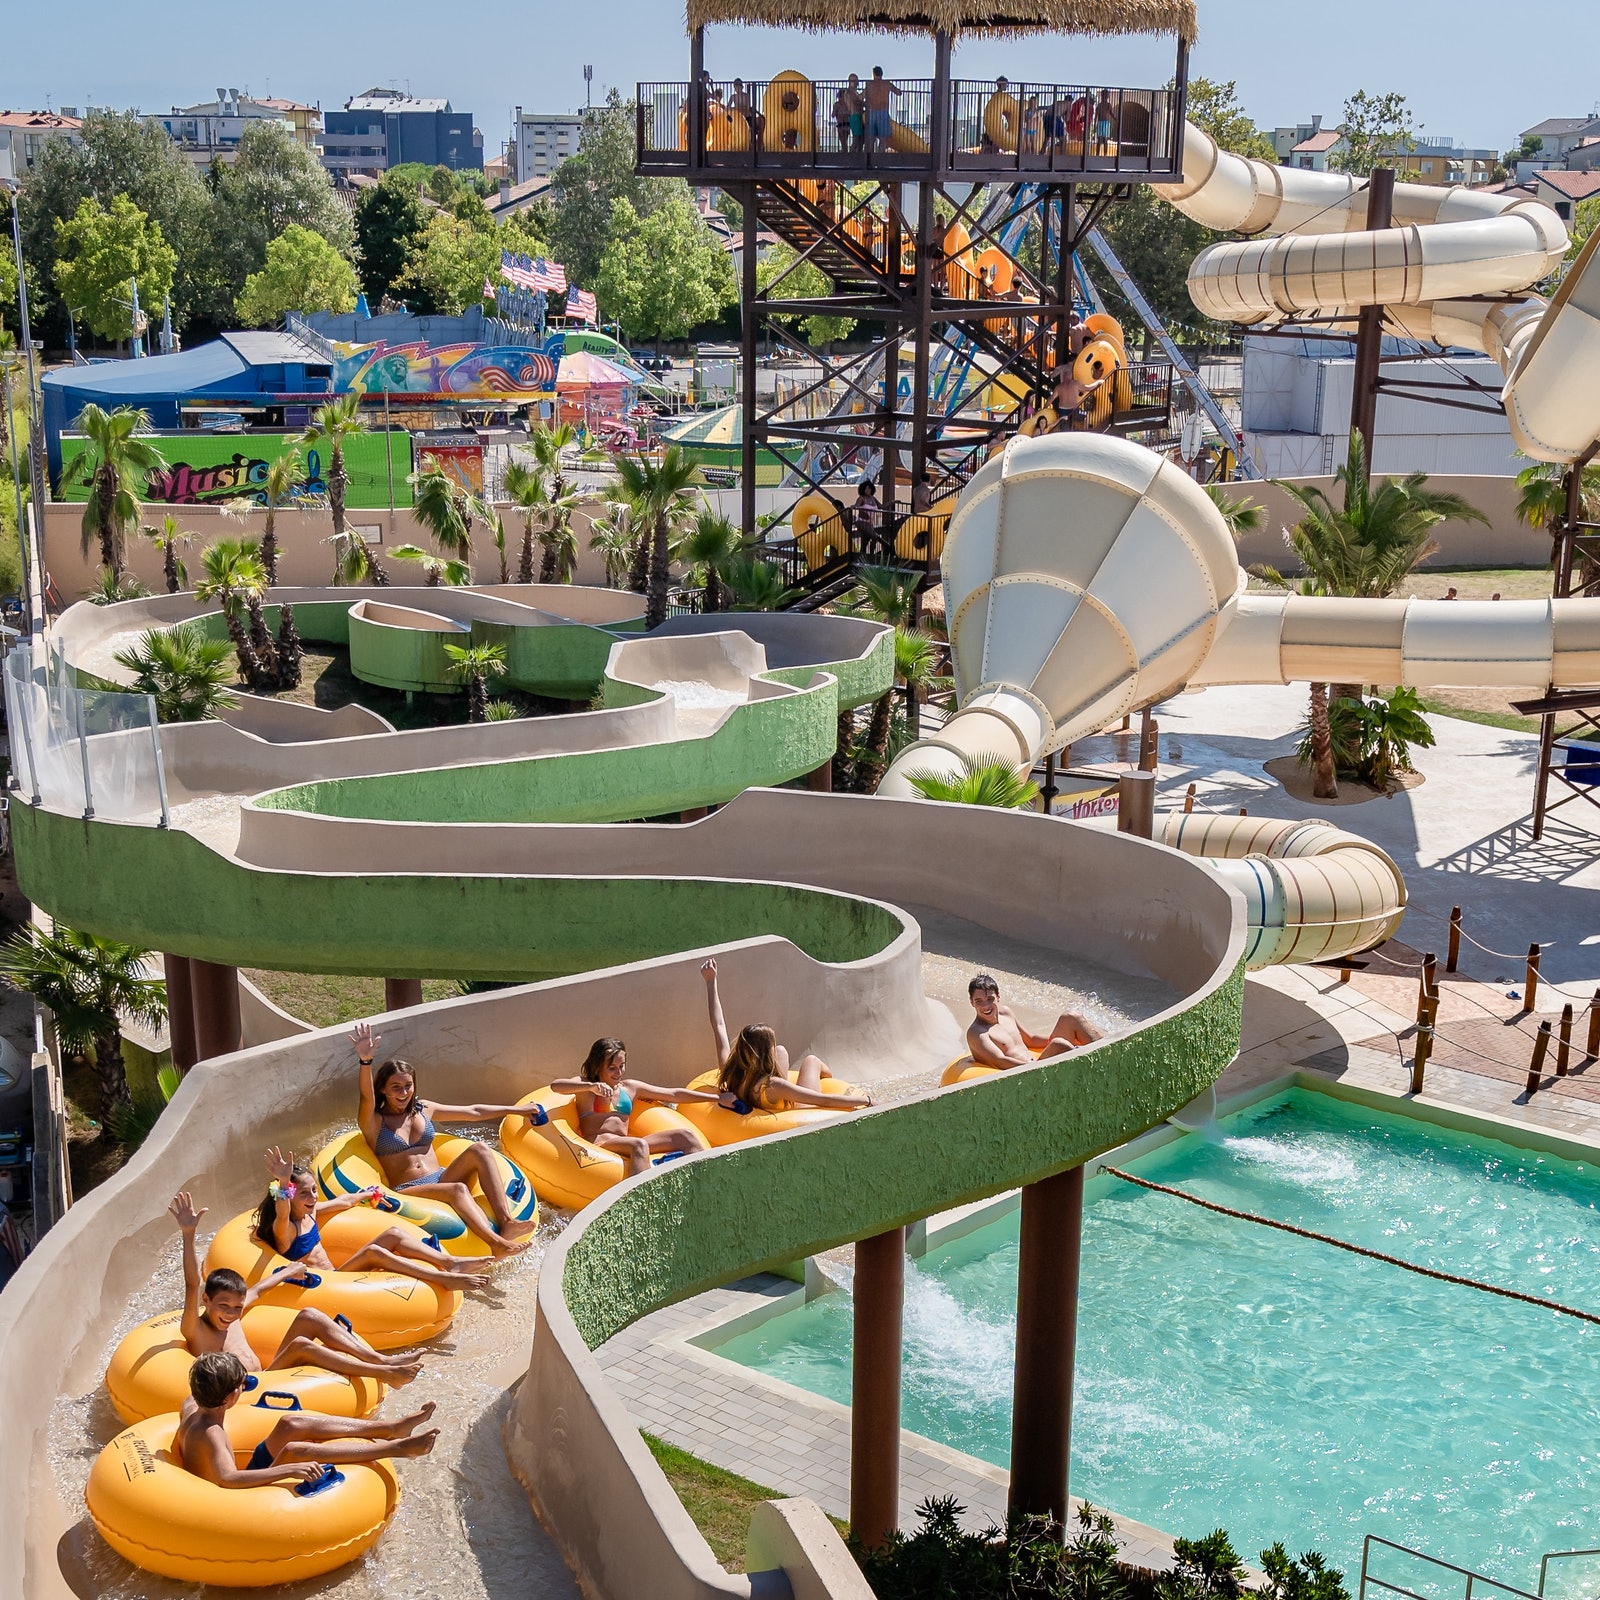 Aquafollie Water Park Caorle in Italy